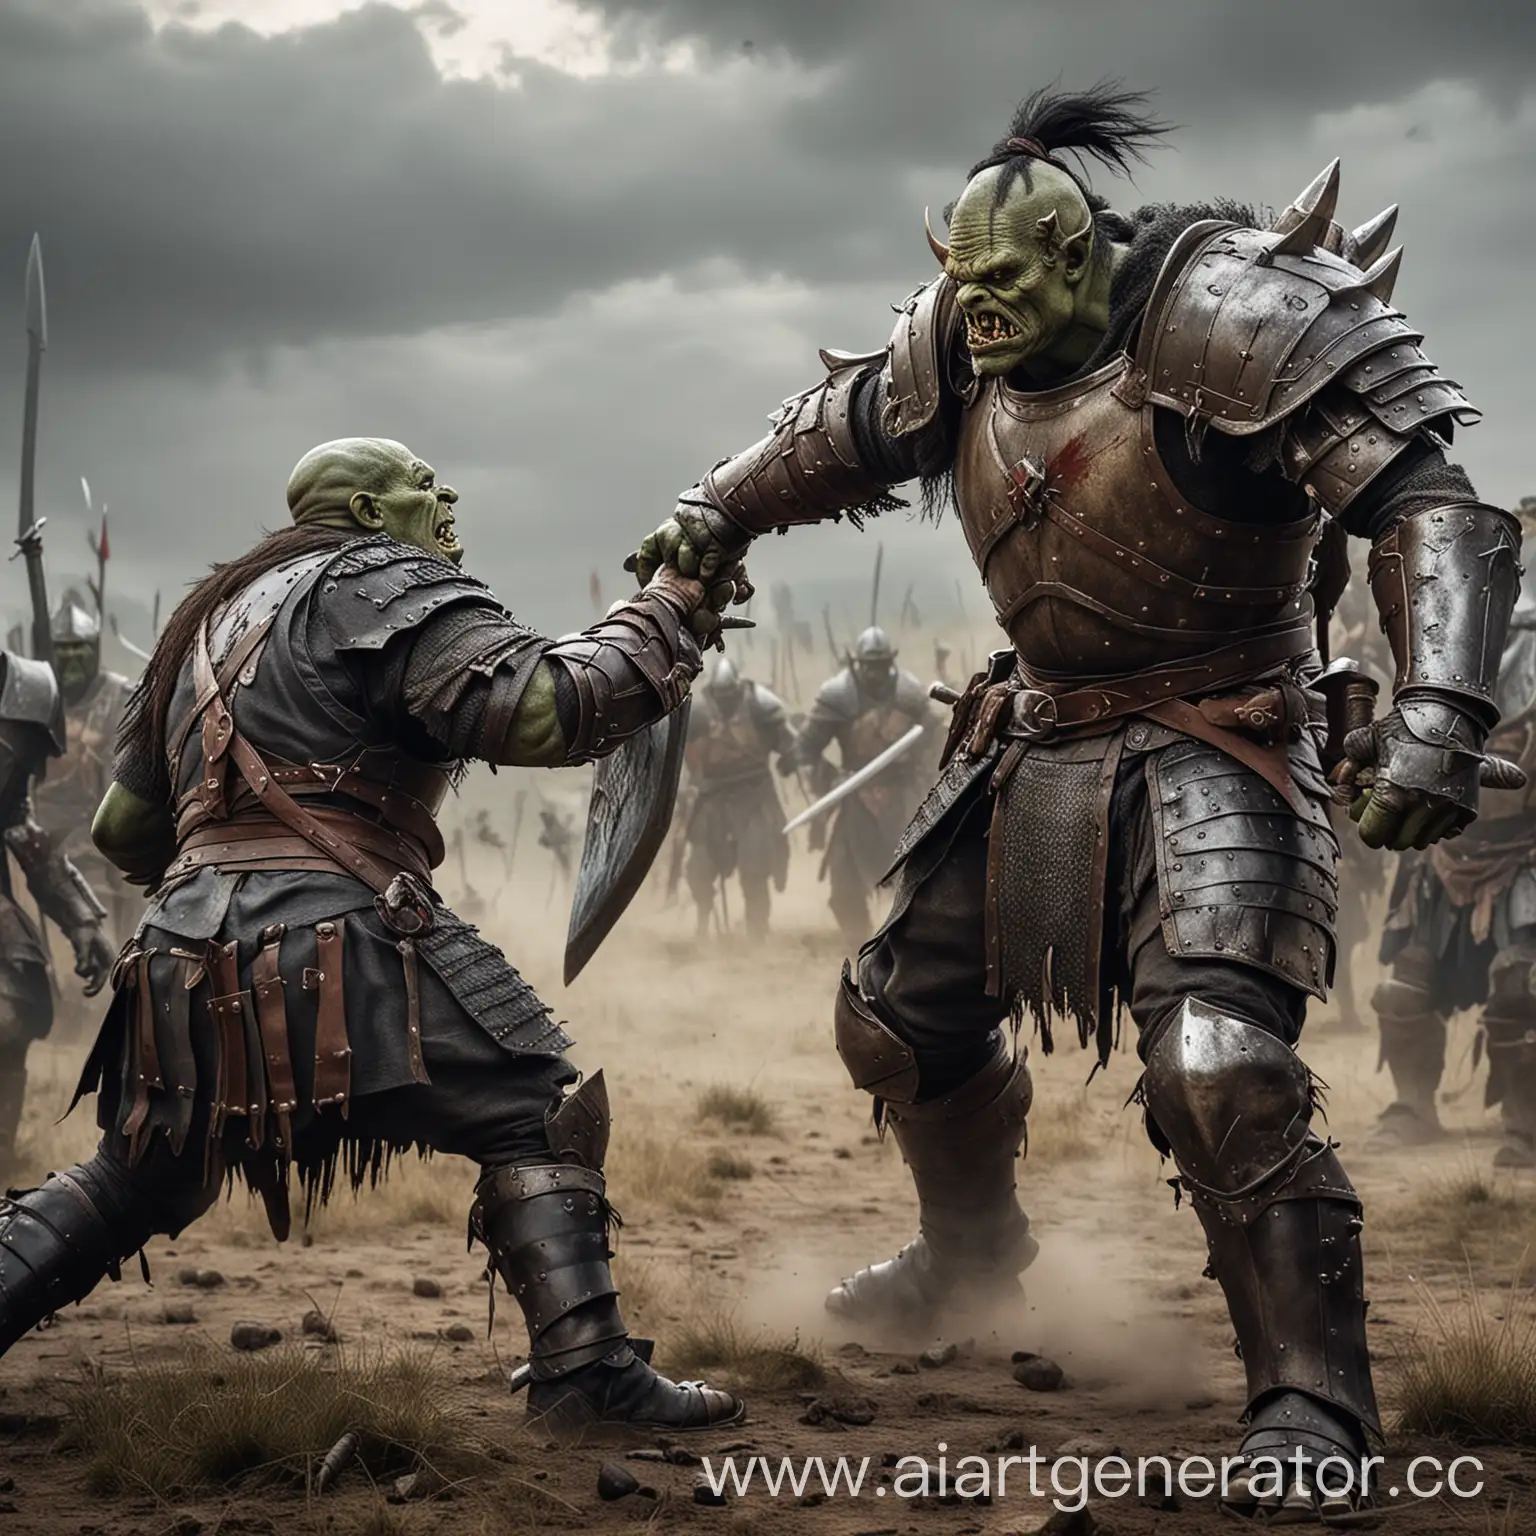 epic battle between an orc and a human knight on the battlefield